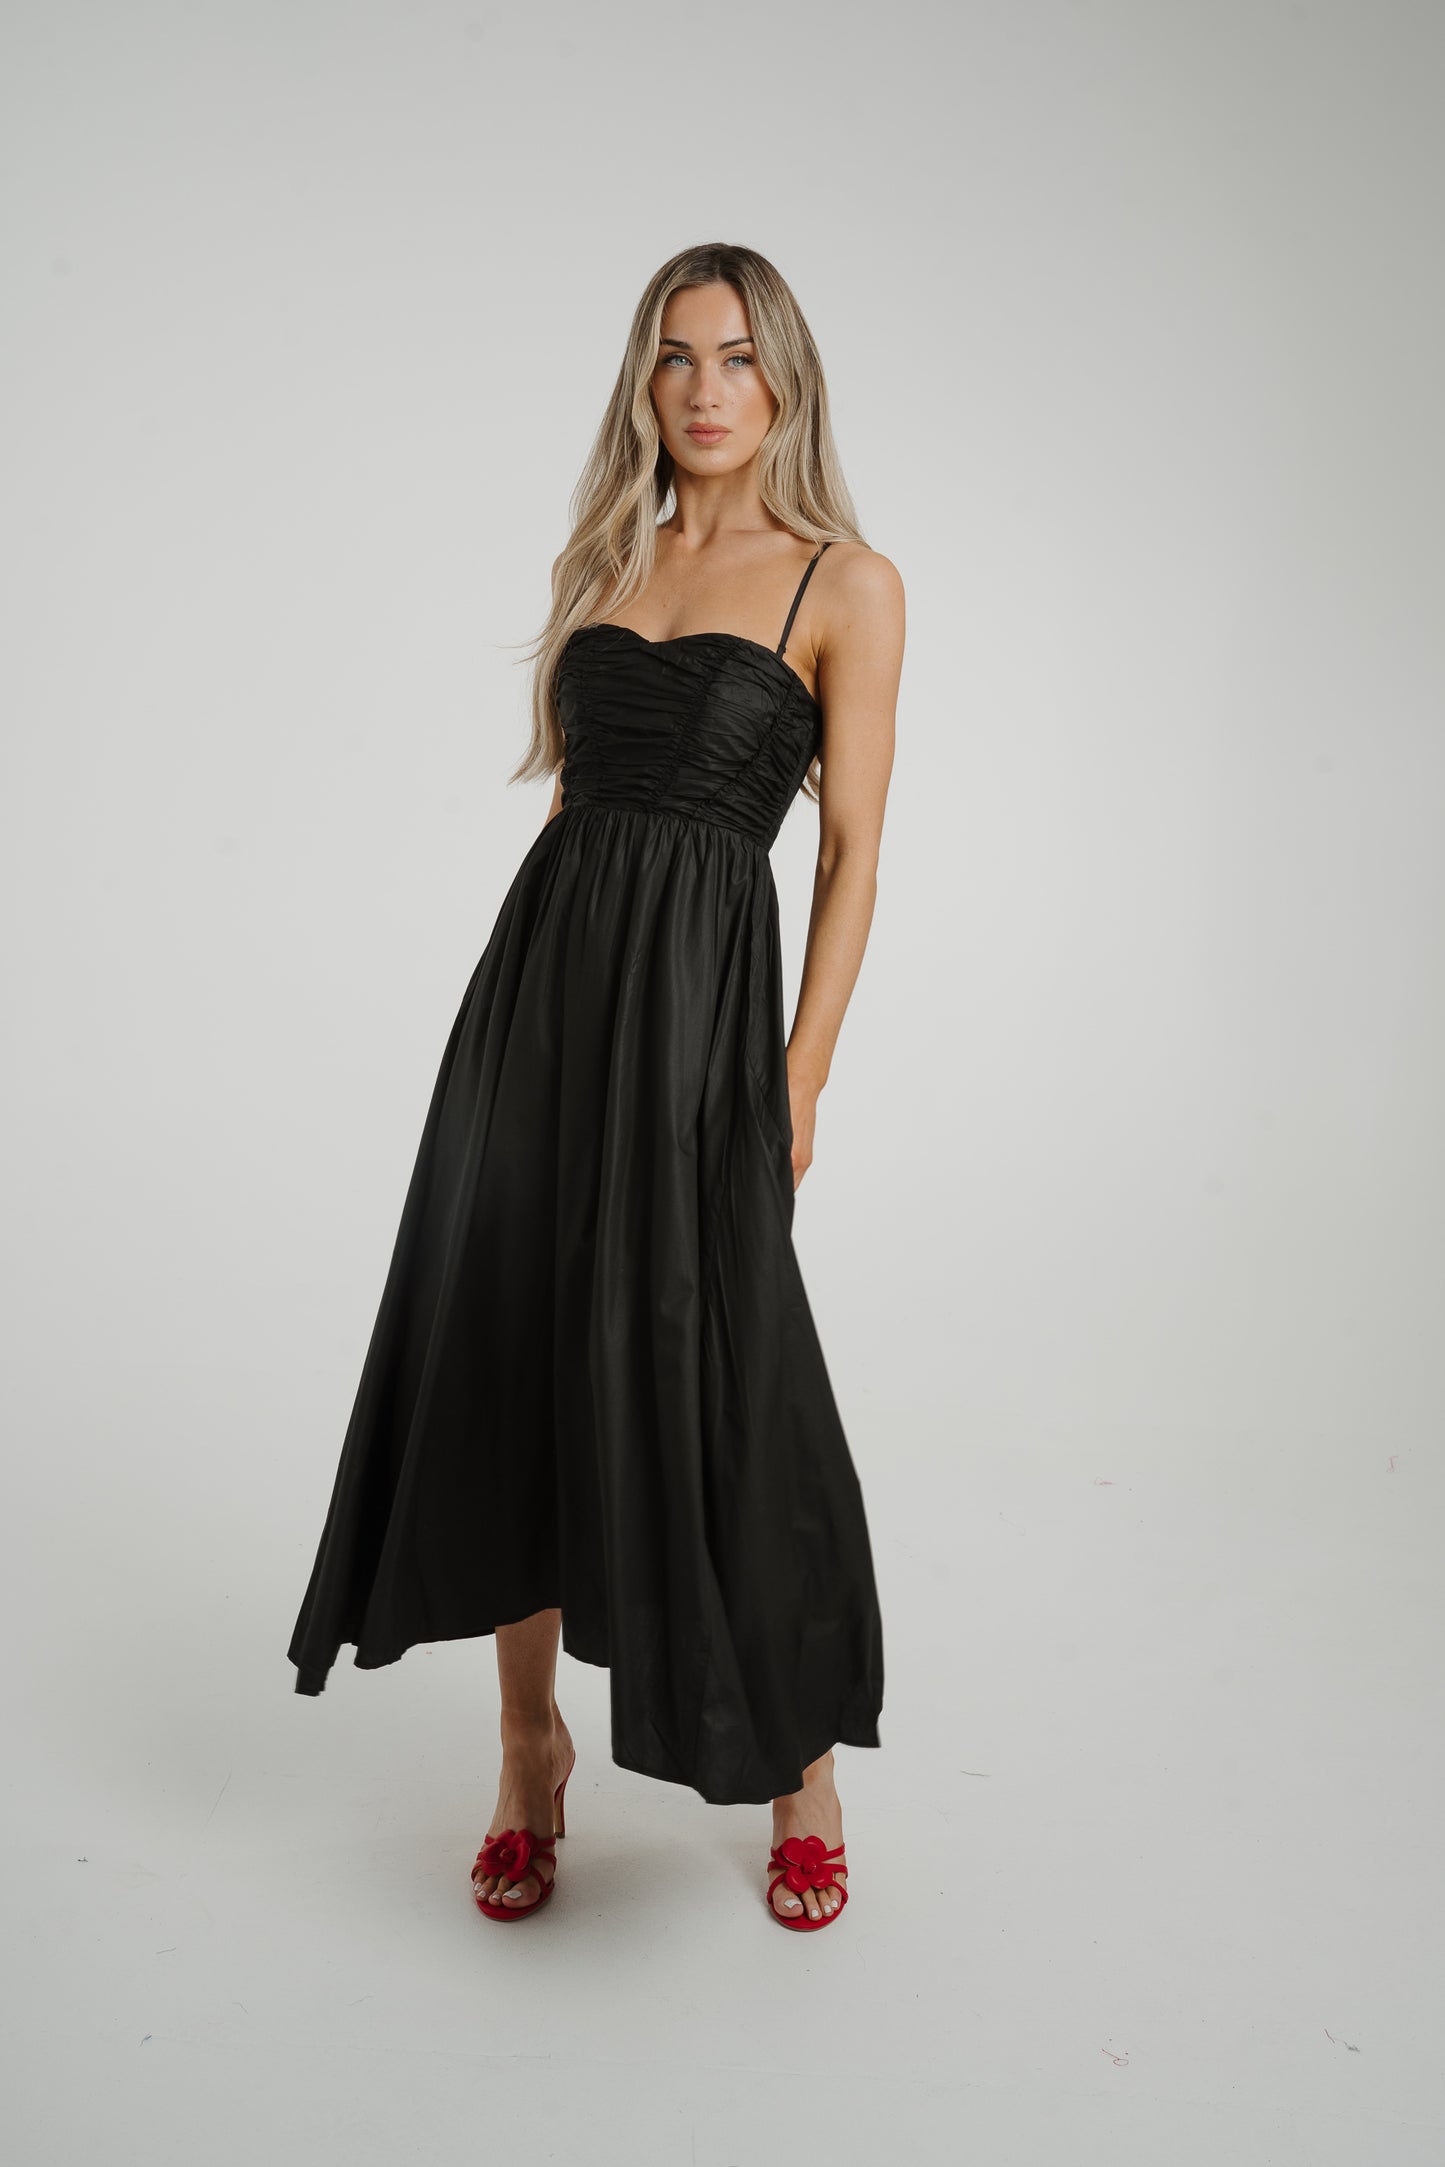 Caitlyn Corset Style Dress In Black